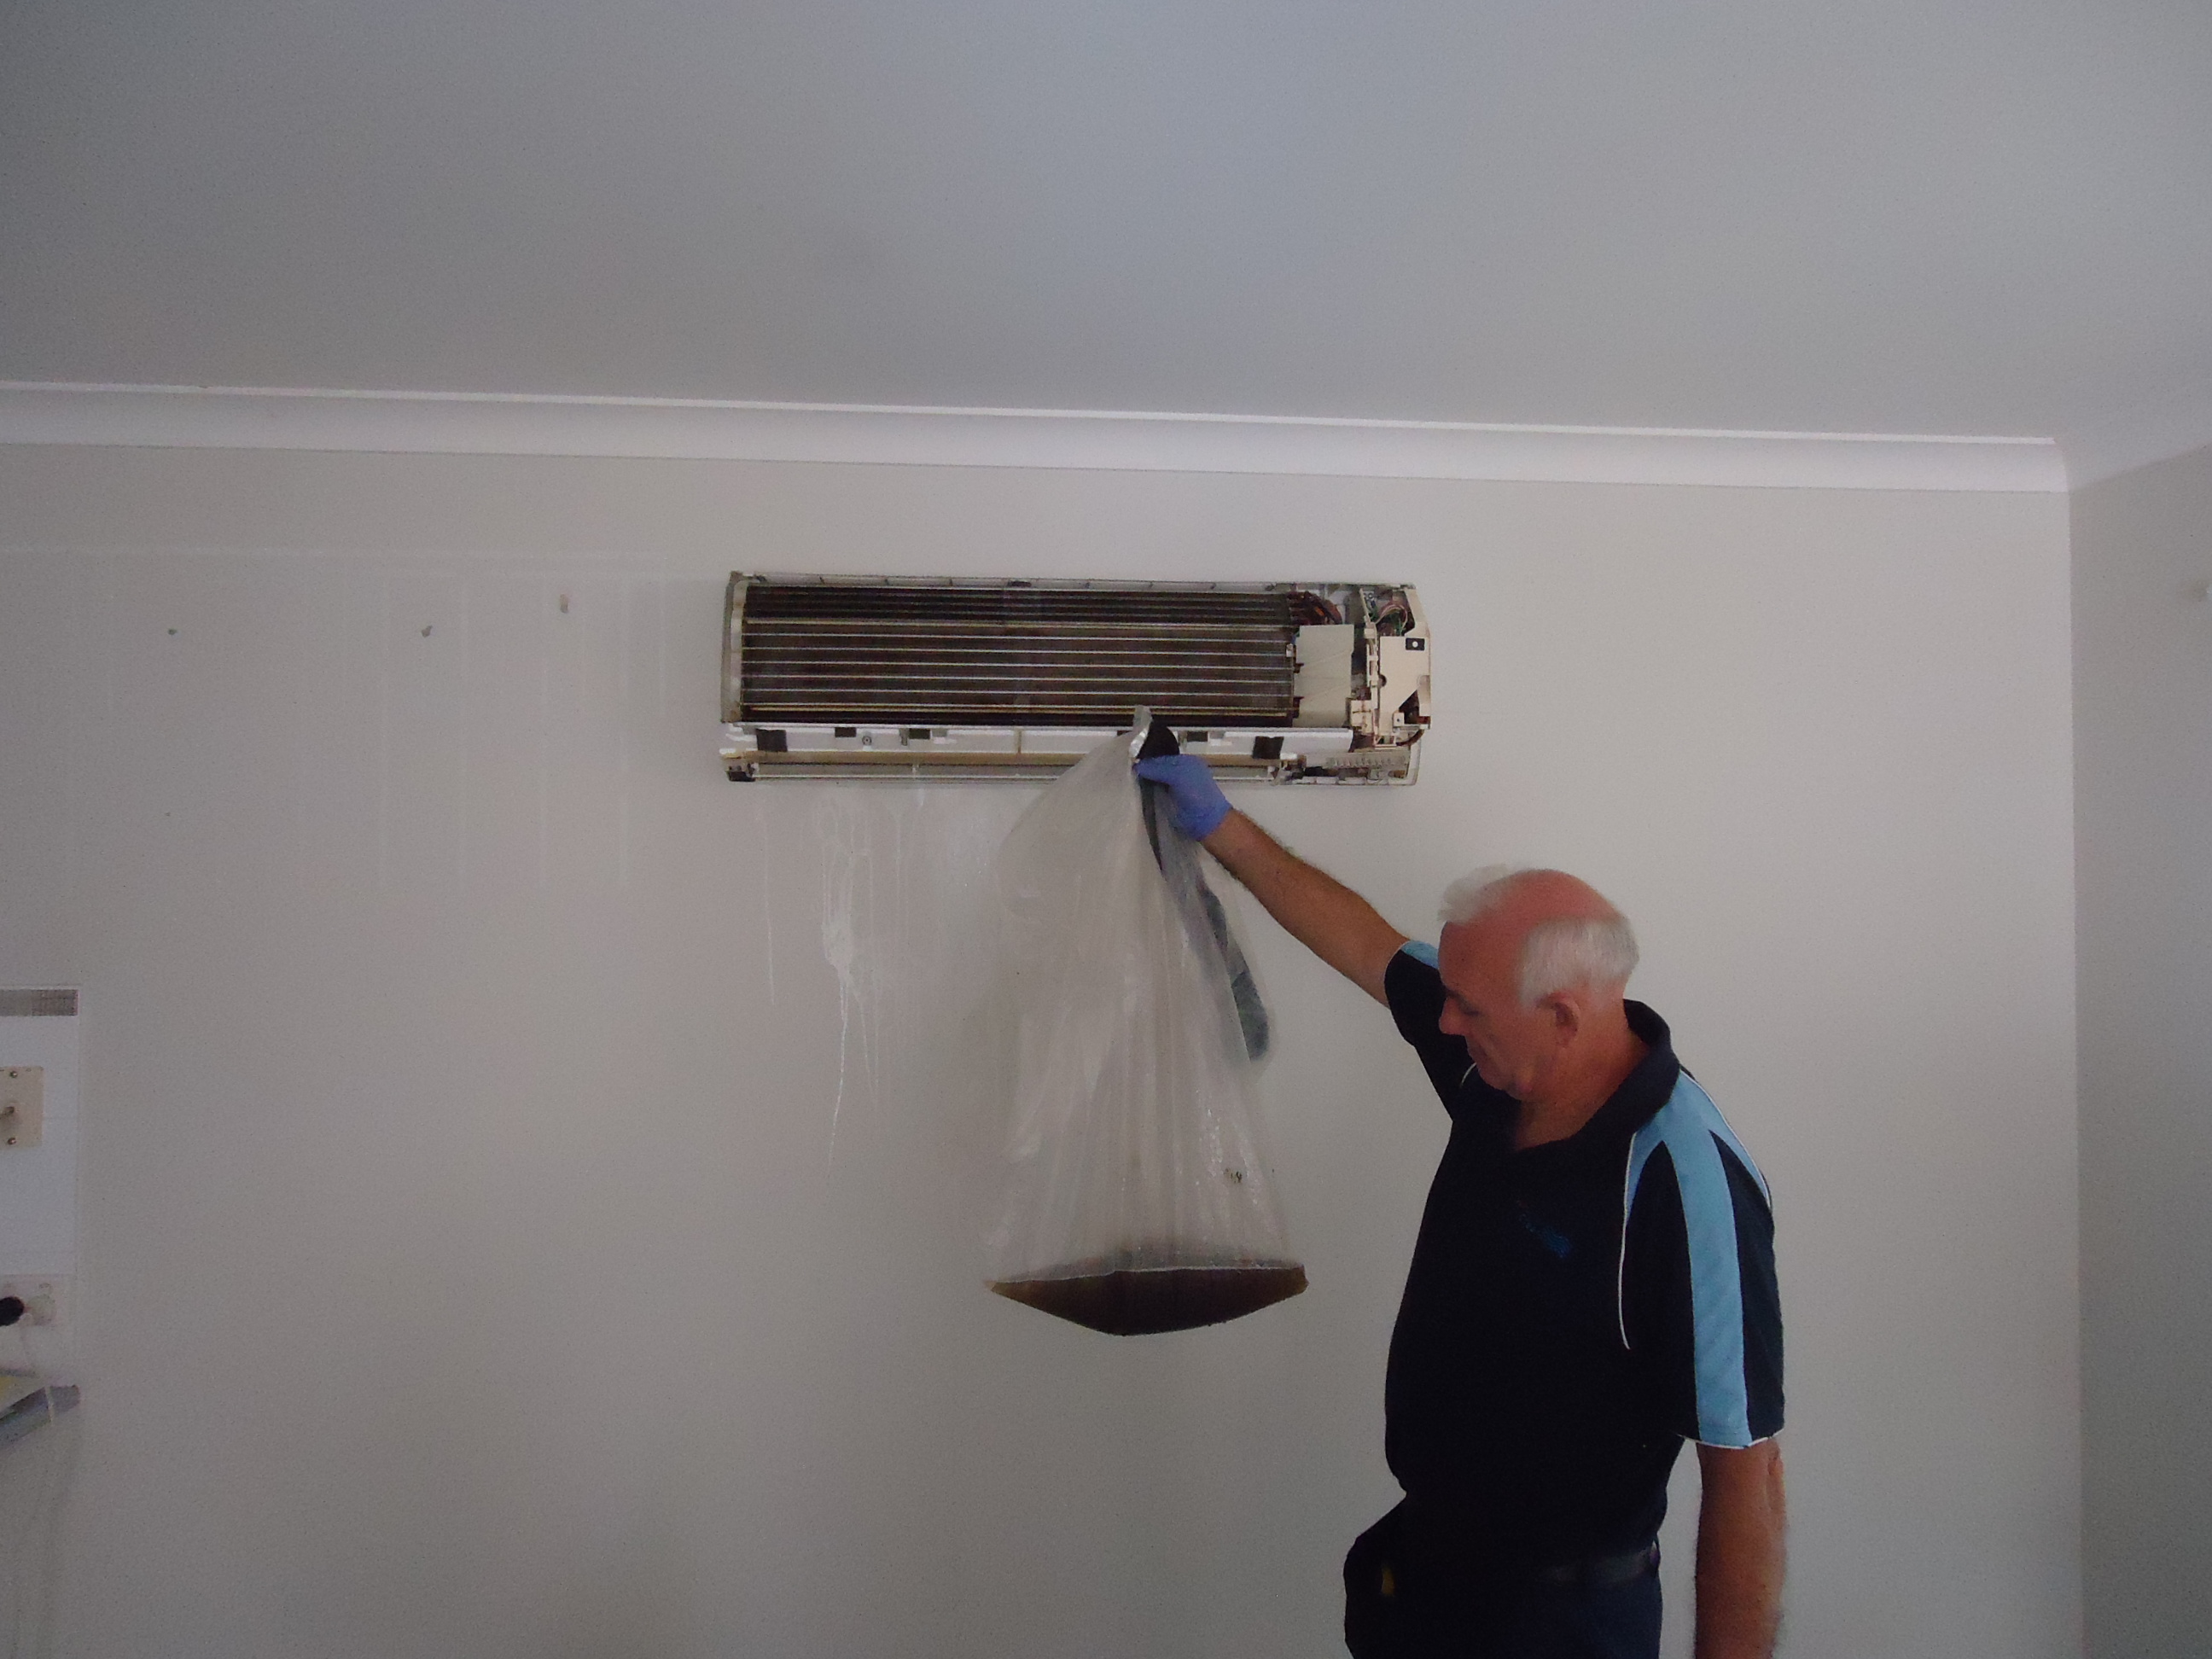 Dealing With Dampness - What To Try And When Dampness Envelops Your Home